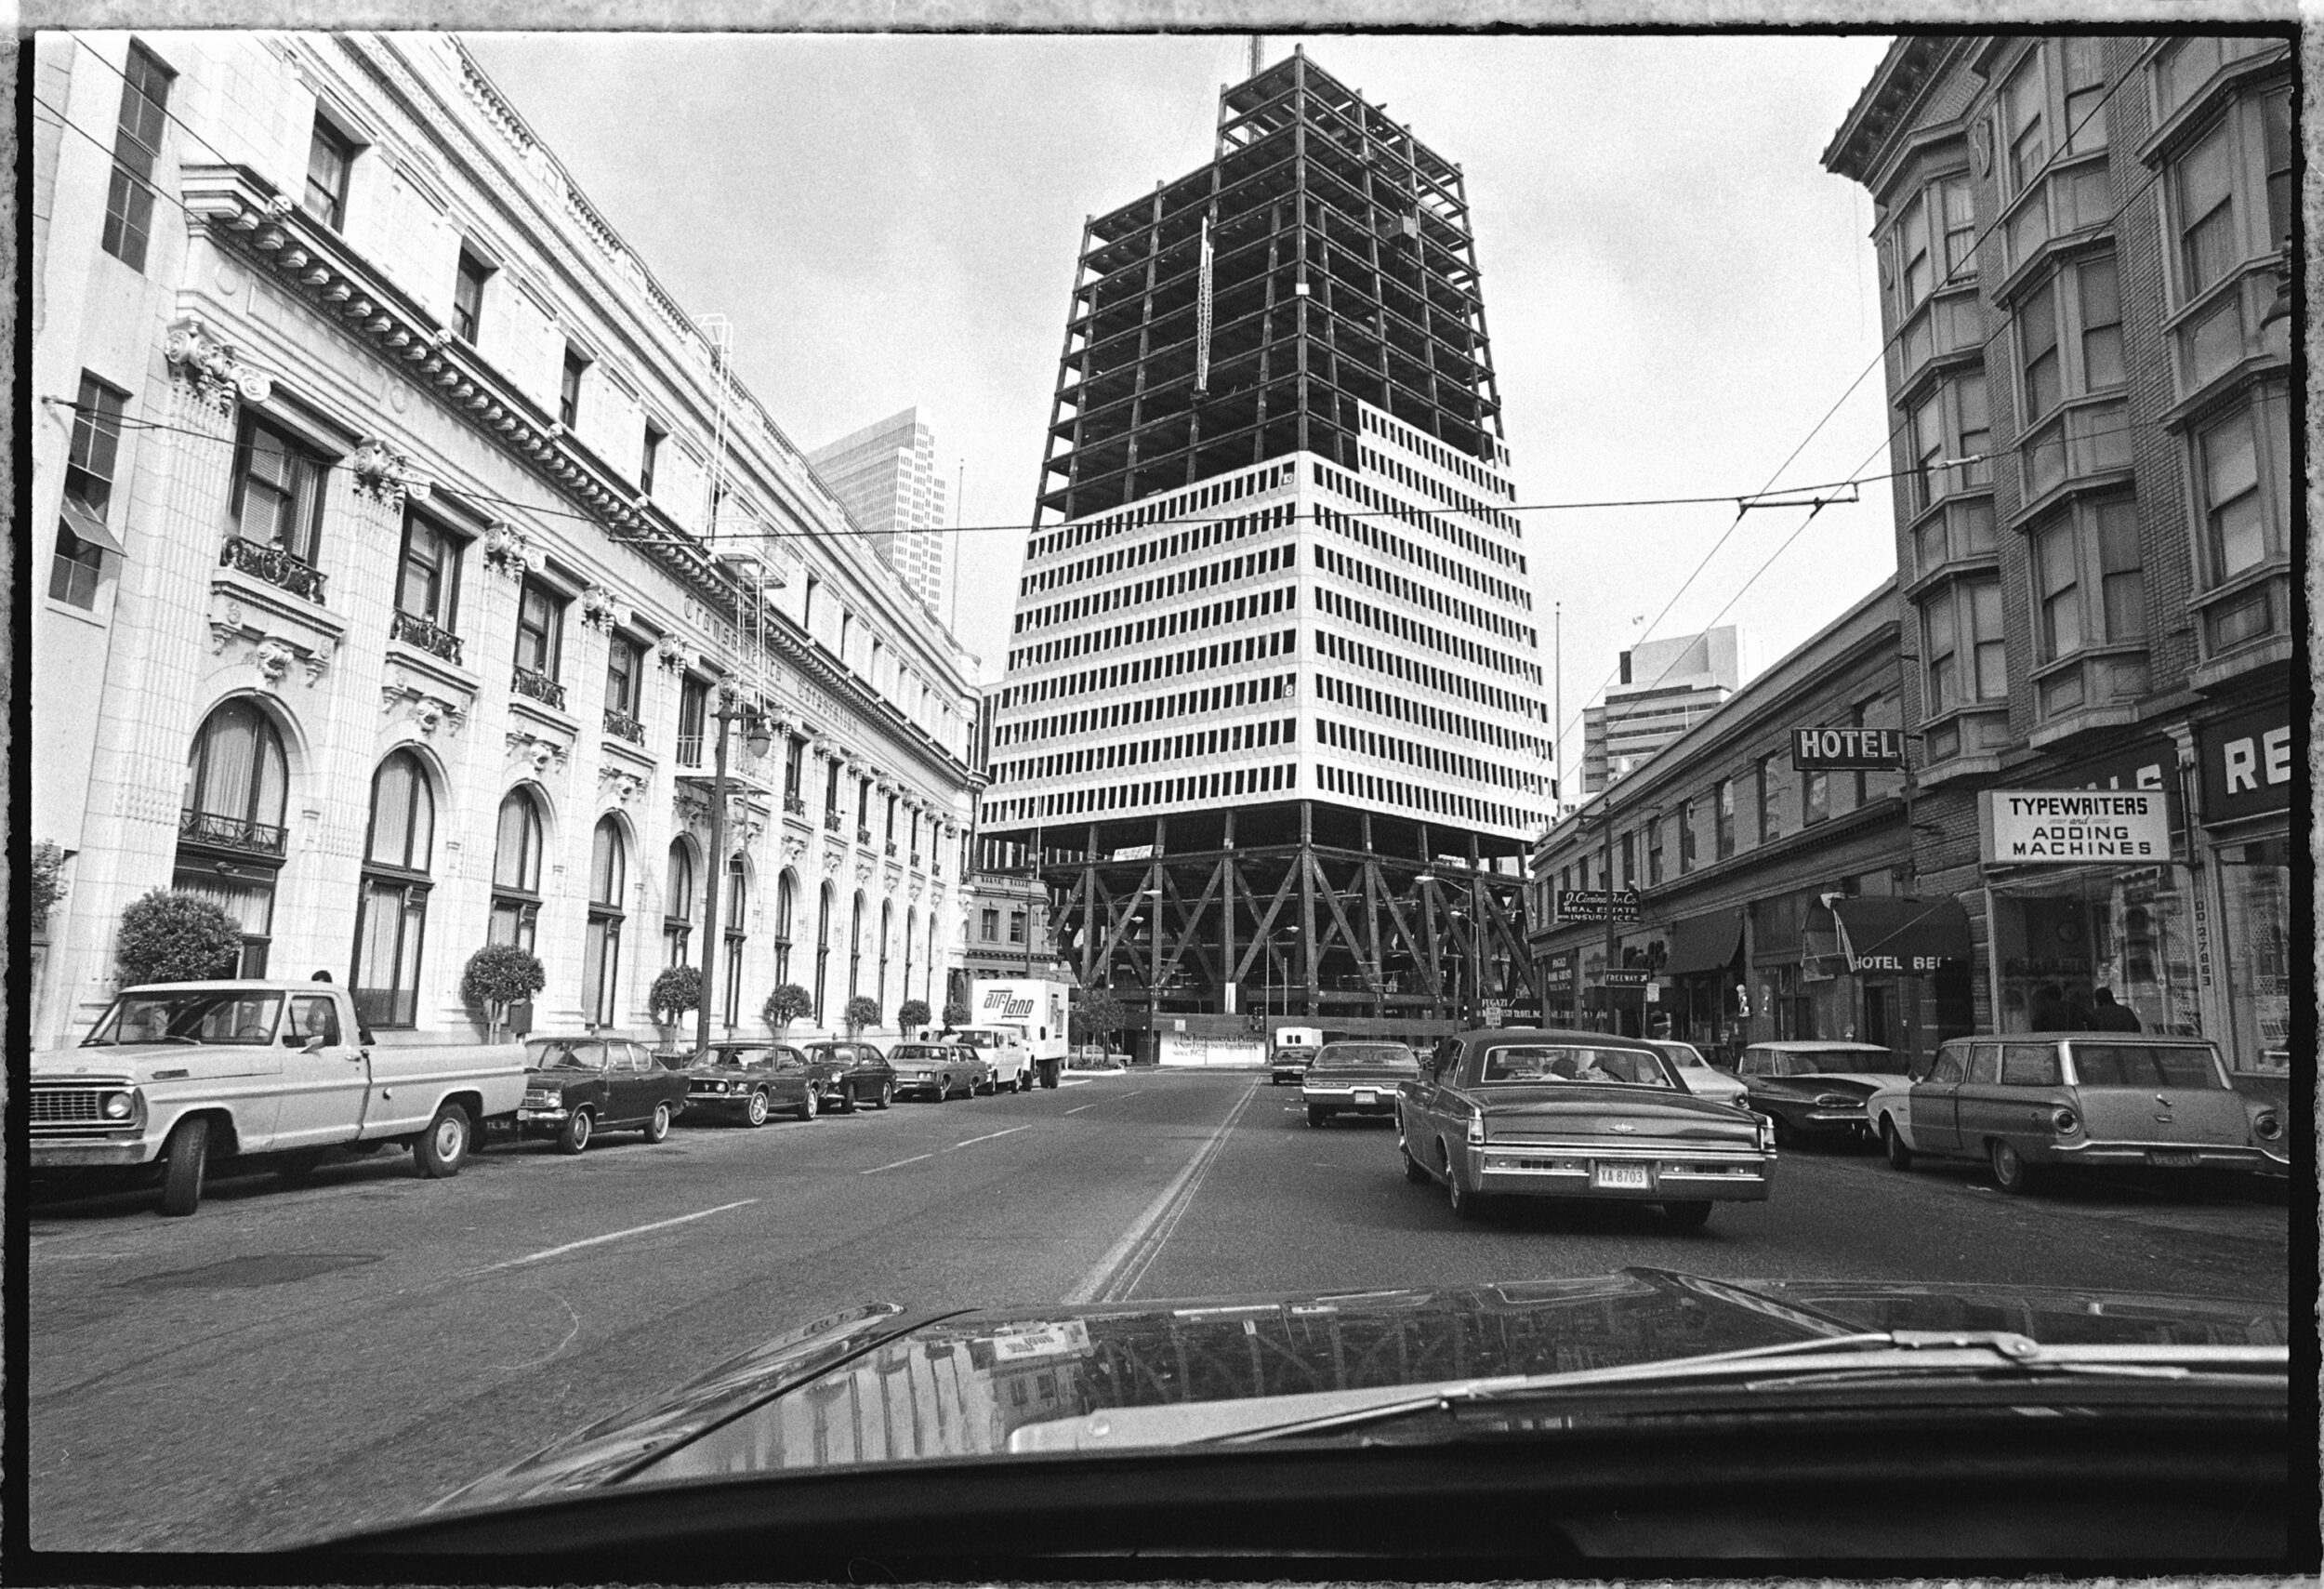 A vintage black and white photo of a busy street with old cars, classic buildings, and a half-finished skyscraper.